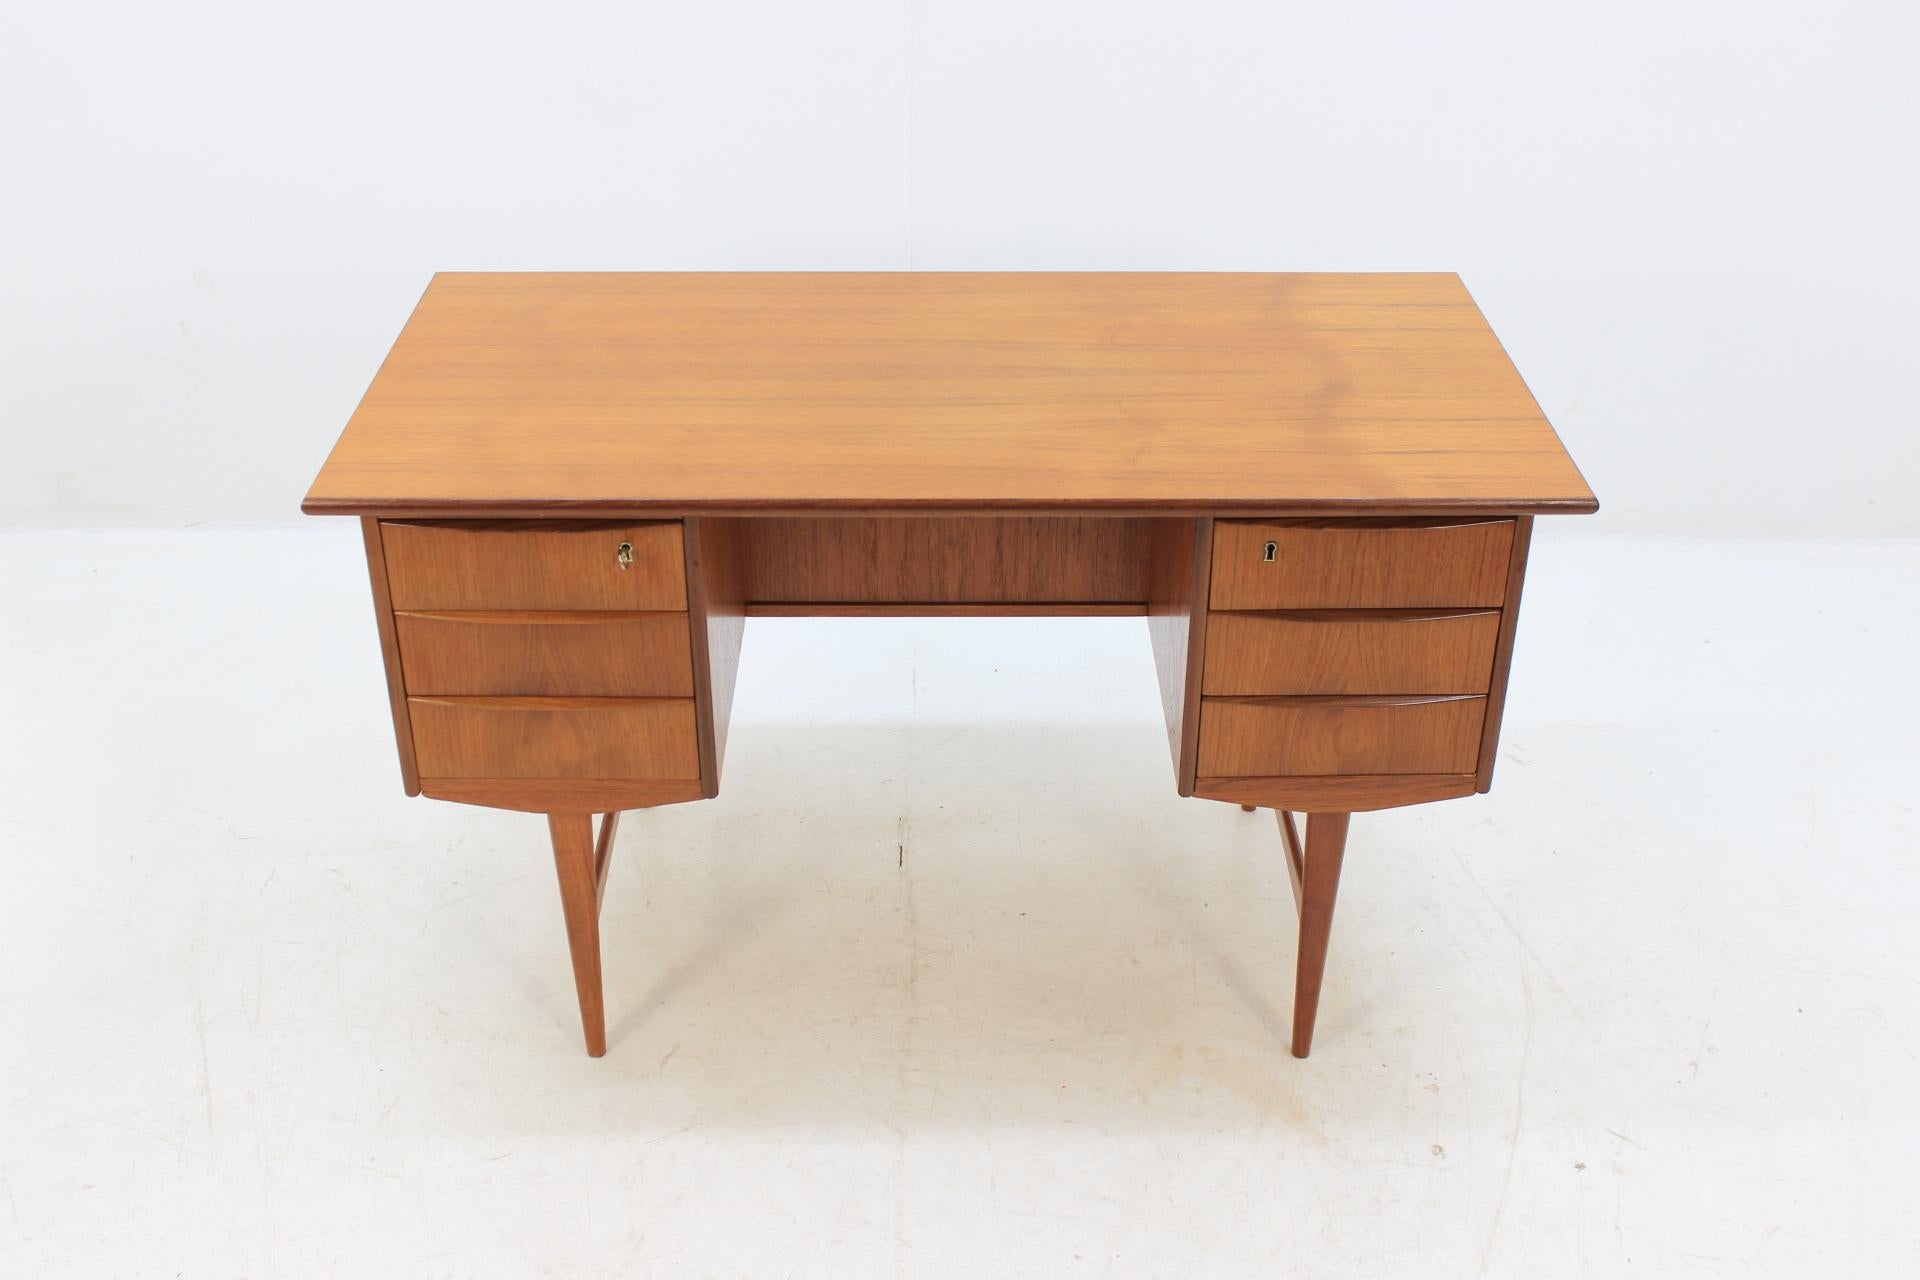 The desk features lockable six drawers and has open storage space on the back side. This item was carefully restored.